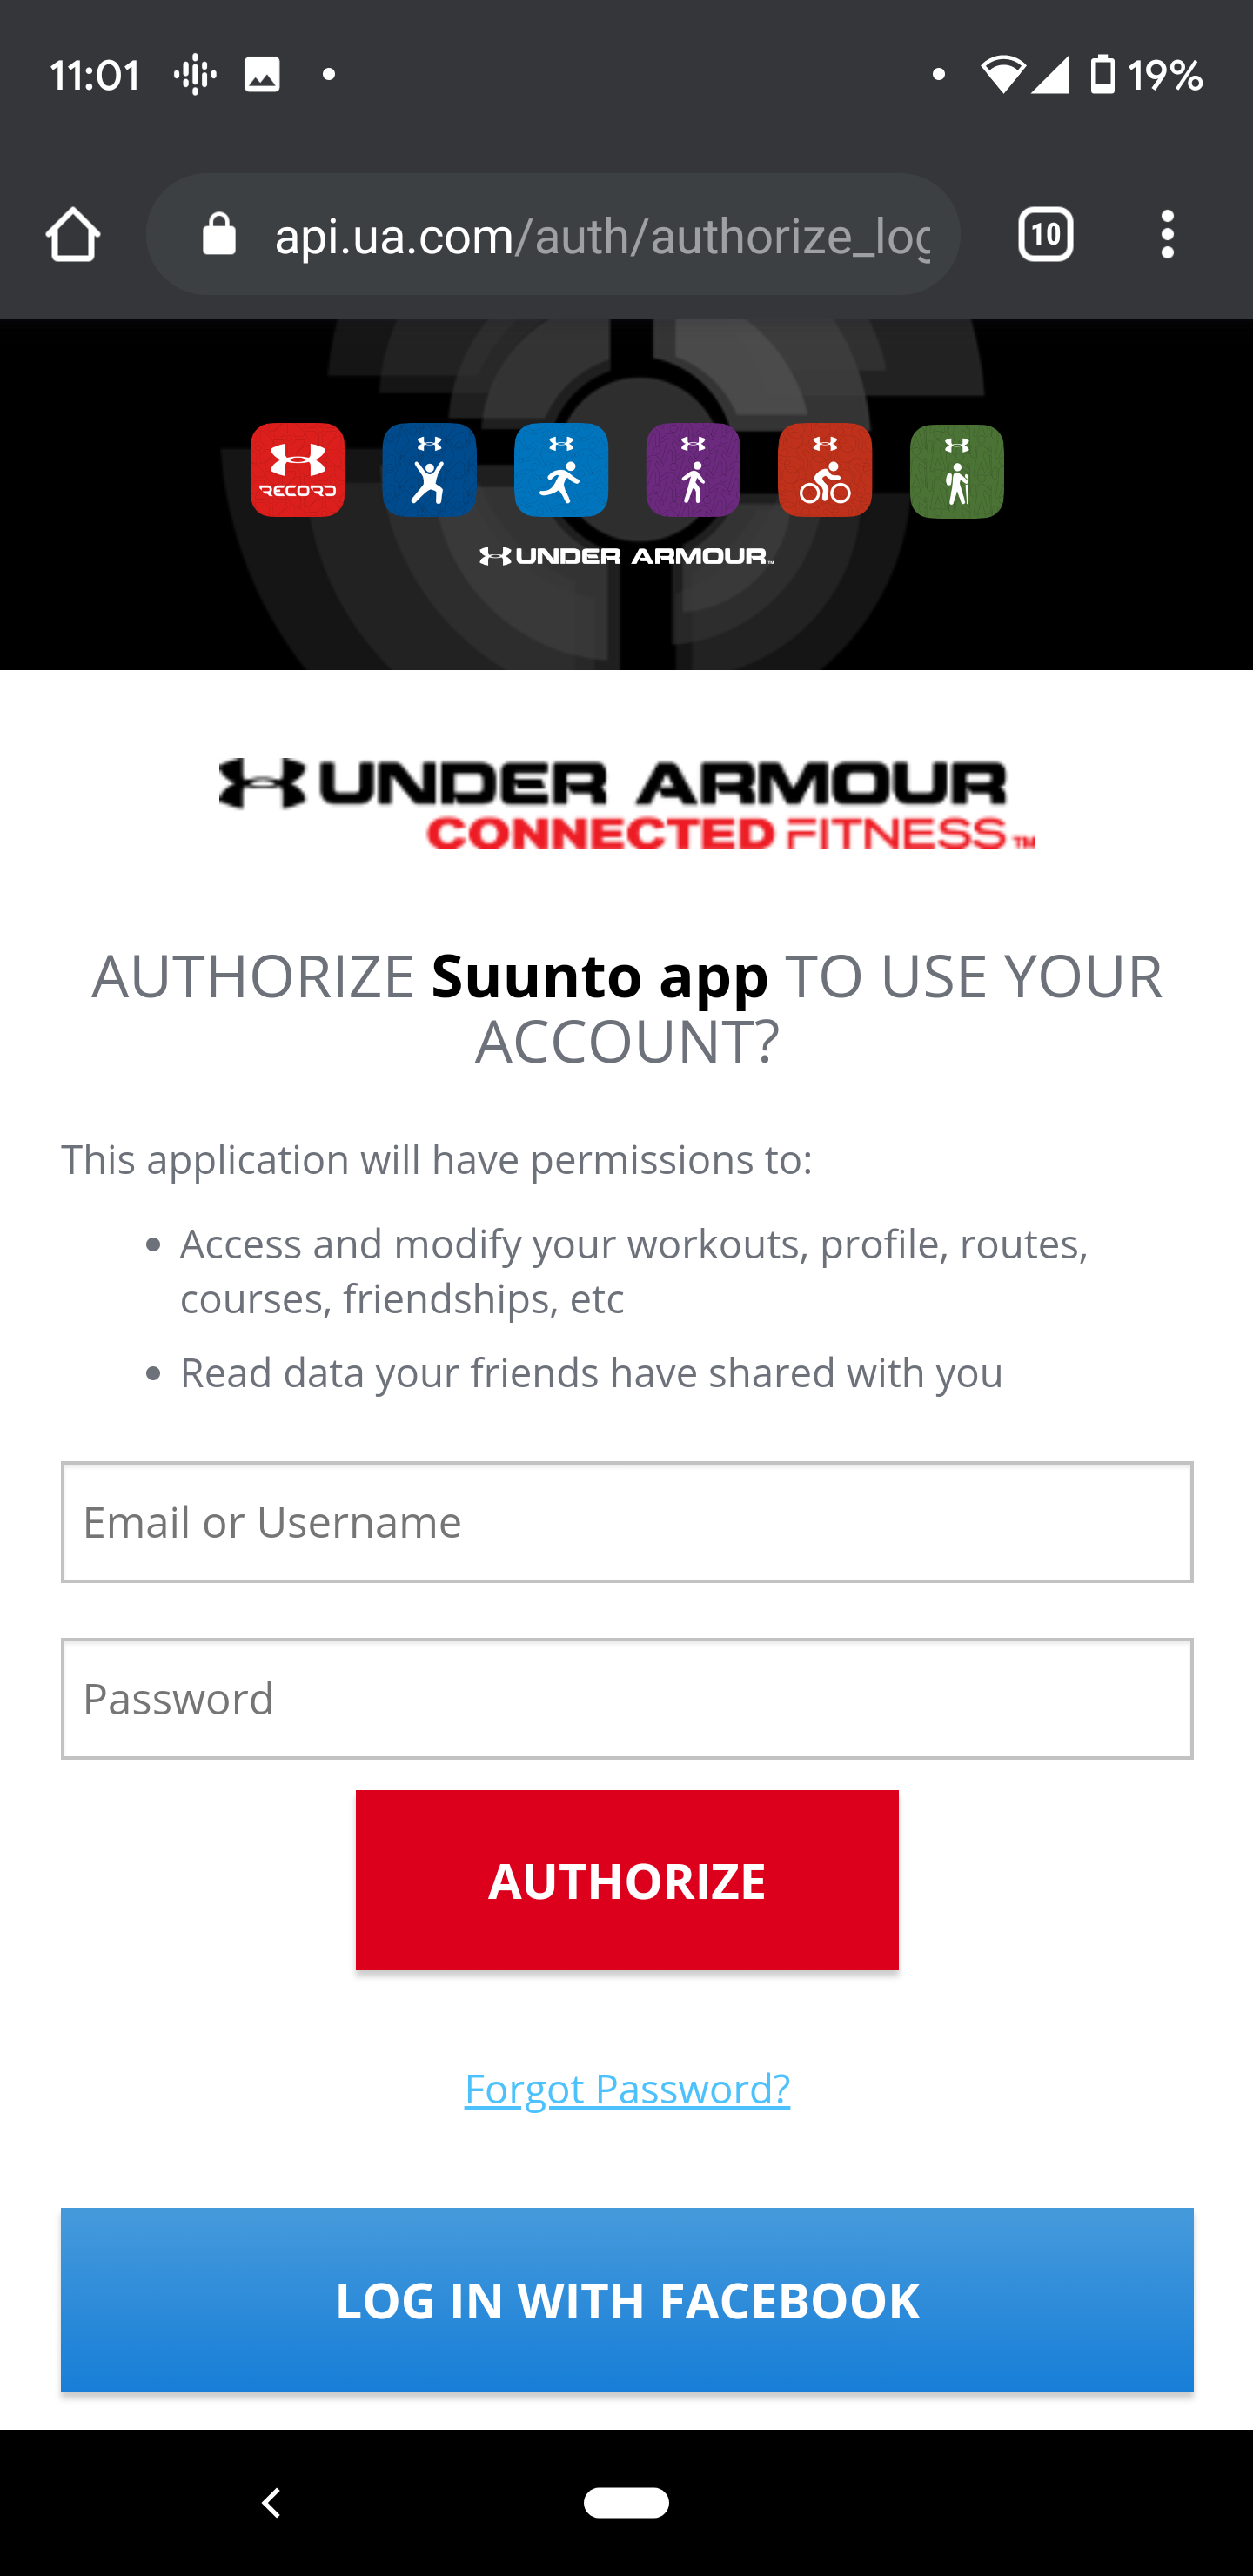 Suunto_login_with_MapMy_and_Record.png